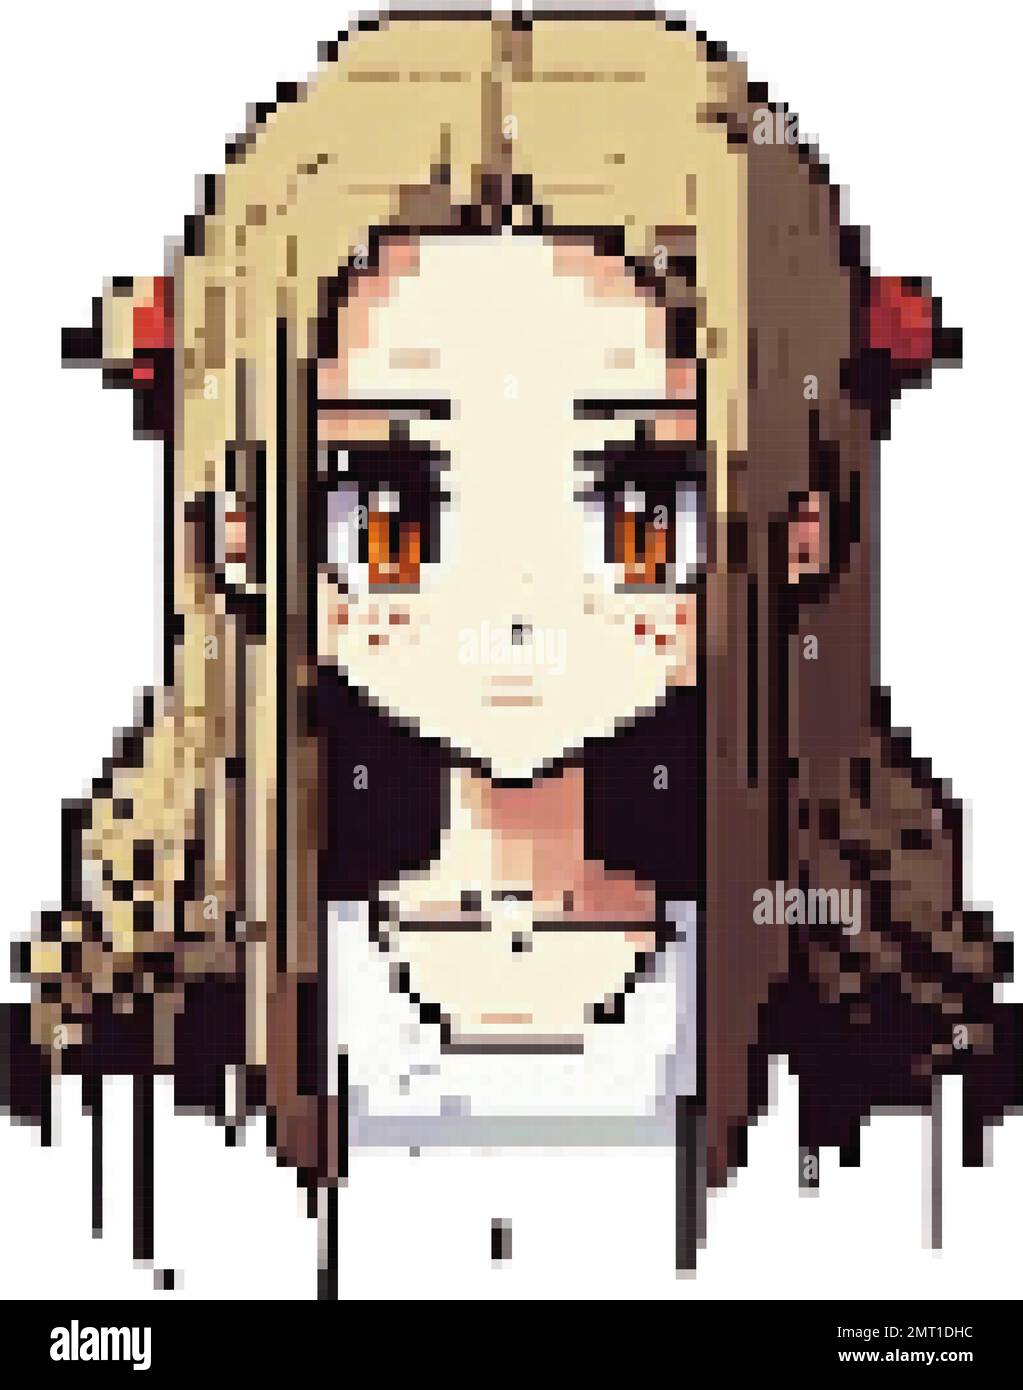 anime girl with loose hair pixel art vector illustration Stock Vector